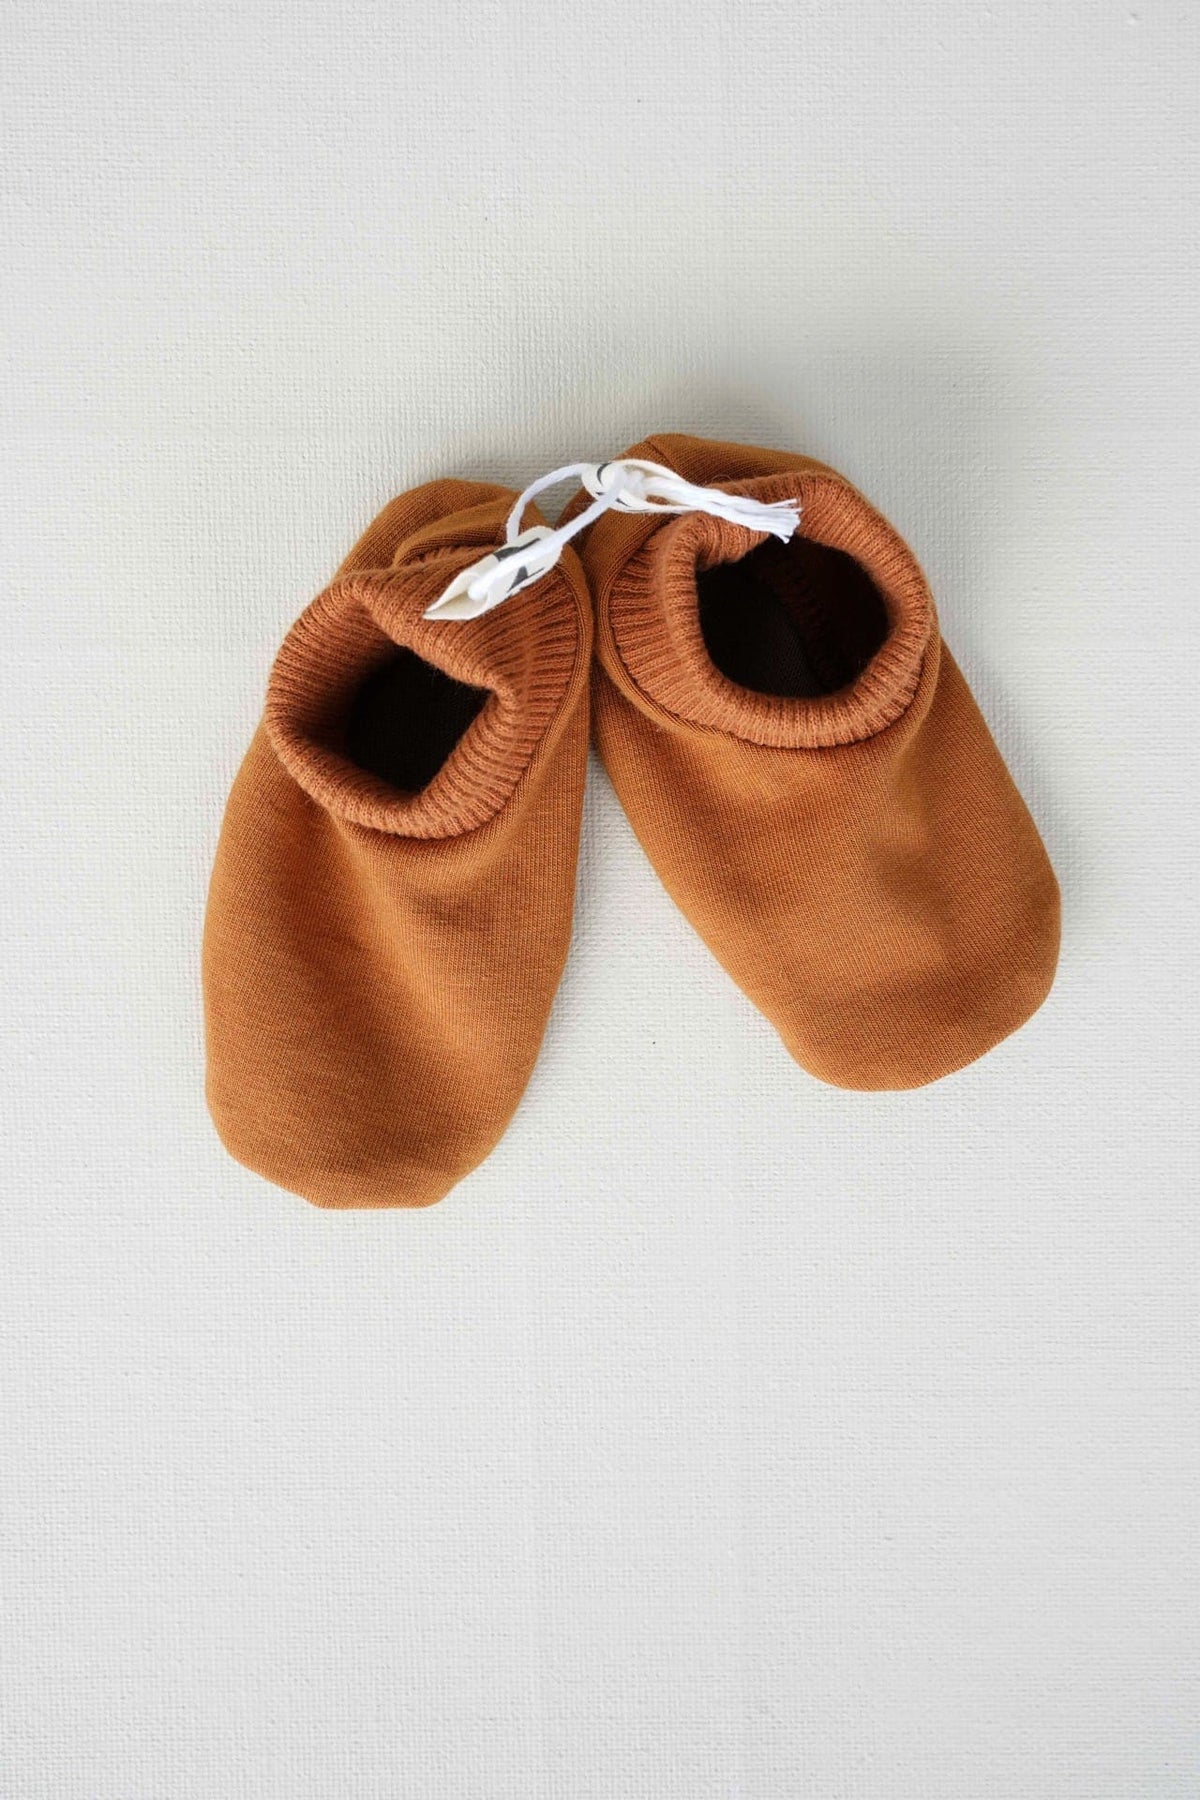 A pair of brown Baby Gift Box – Copper baby shoes by Peppin on a white surface.